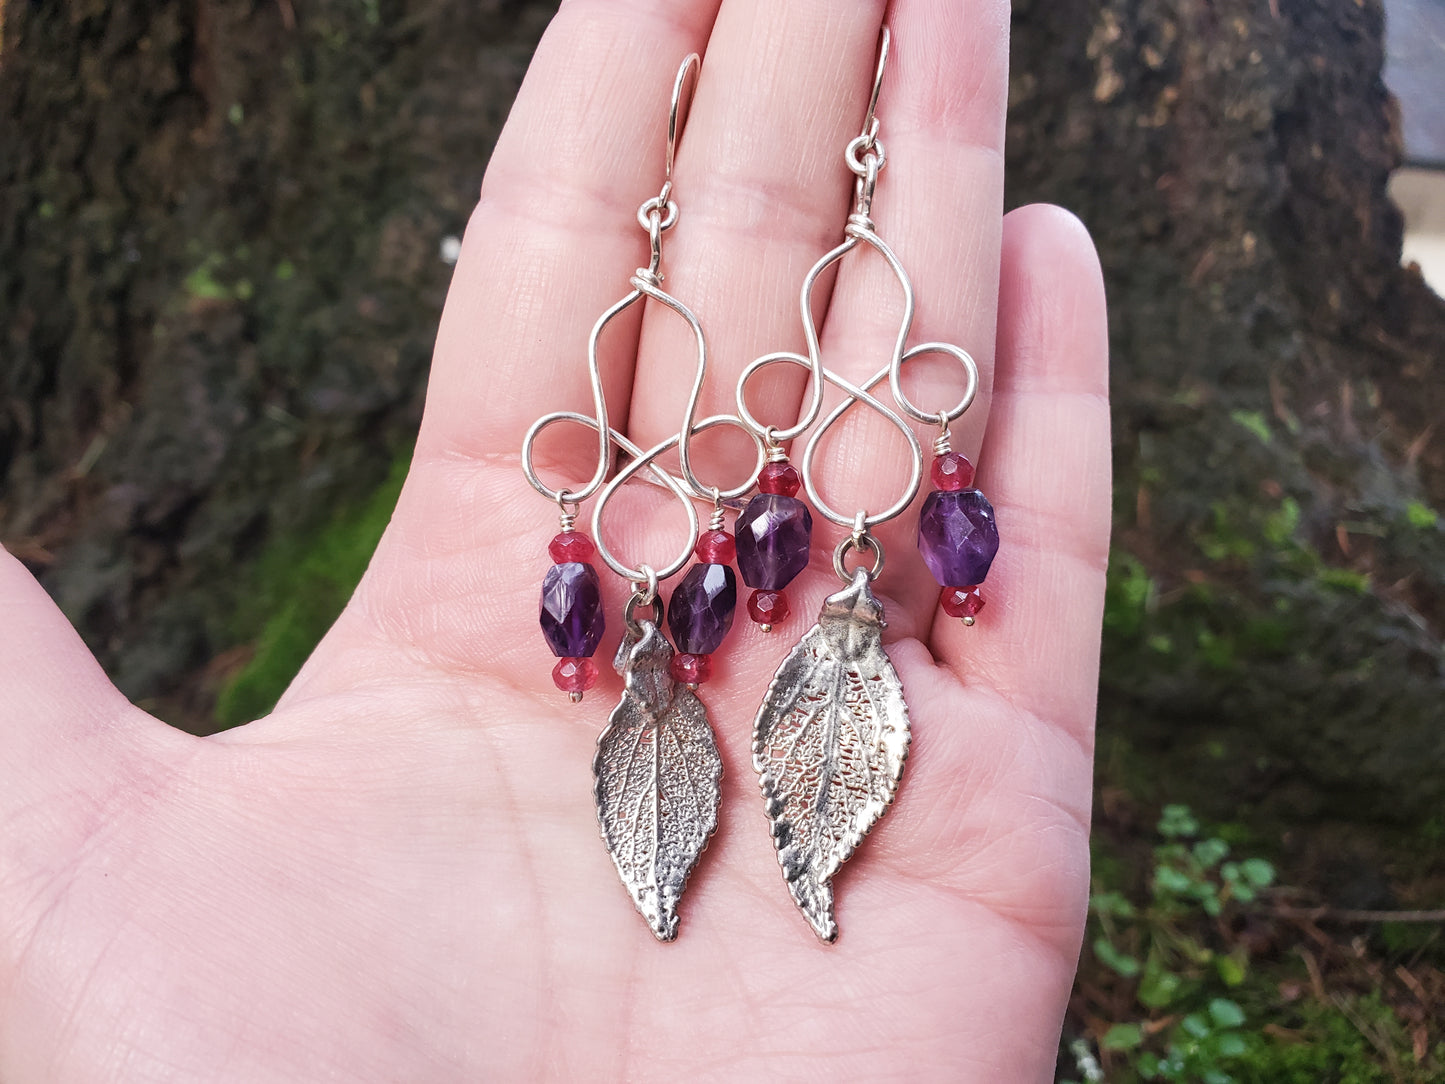 Cailly - Amethyst and Garnet Sterling Silver Earrings with Silver Plated Leaves.